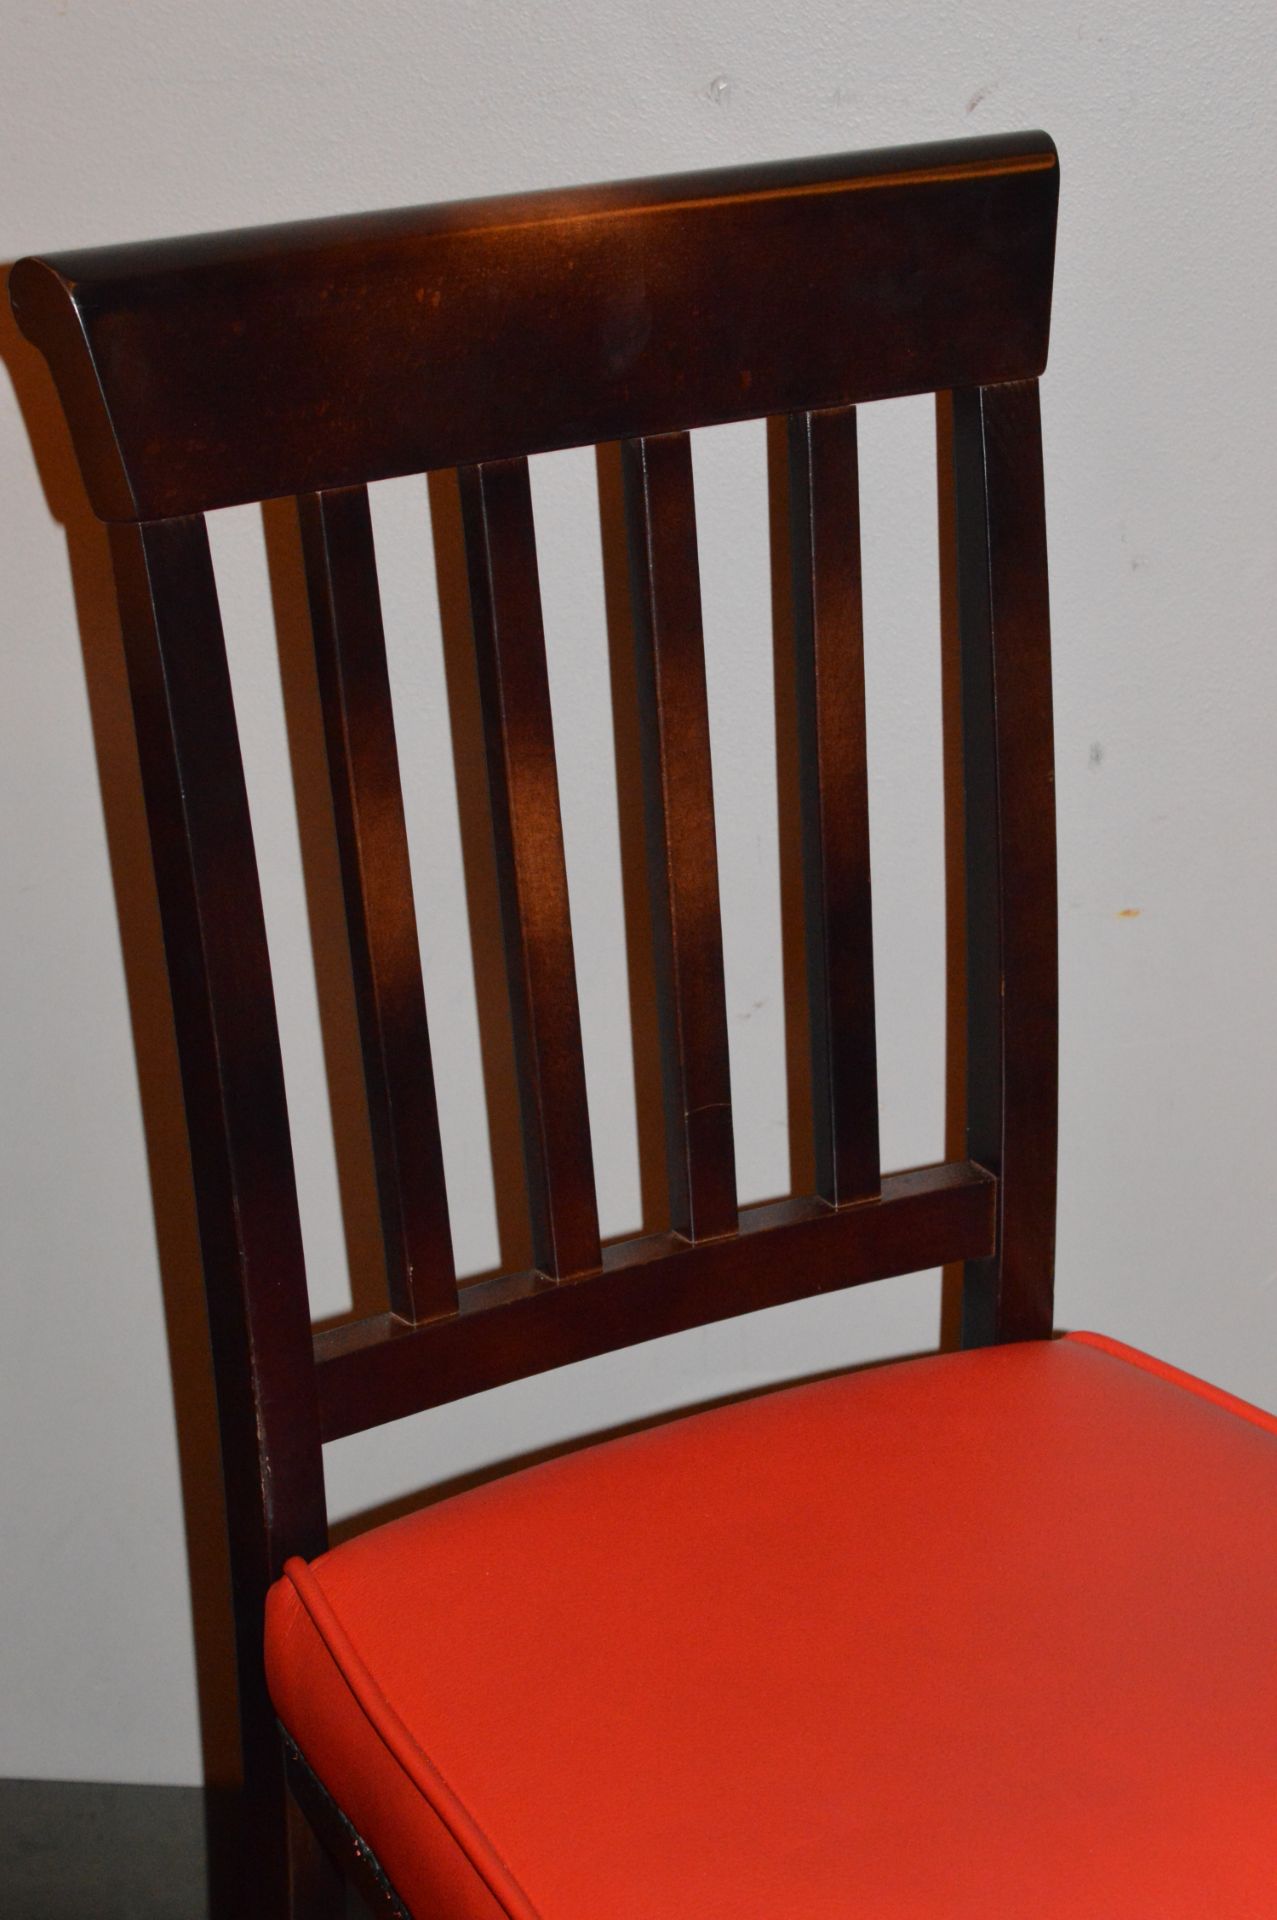 5 x High Back Dining Chairs With Red Leather Seat Cushions and Studded Detail - Hardwoord Frames - - Image 2 of 4